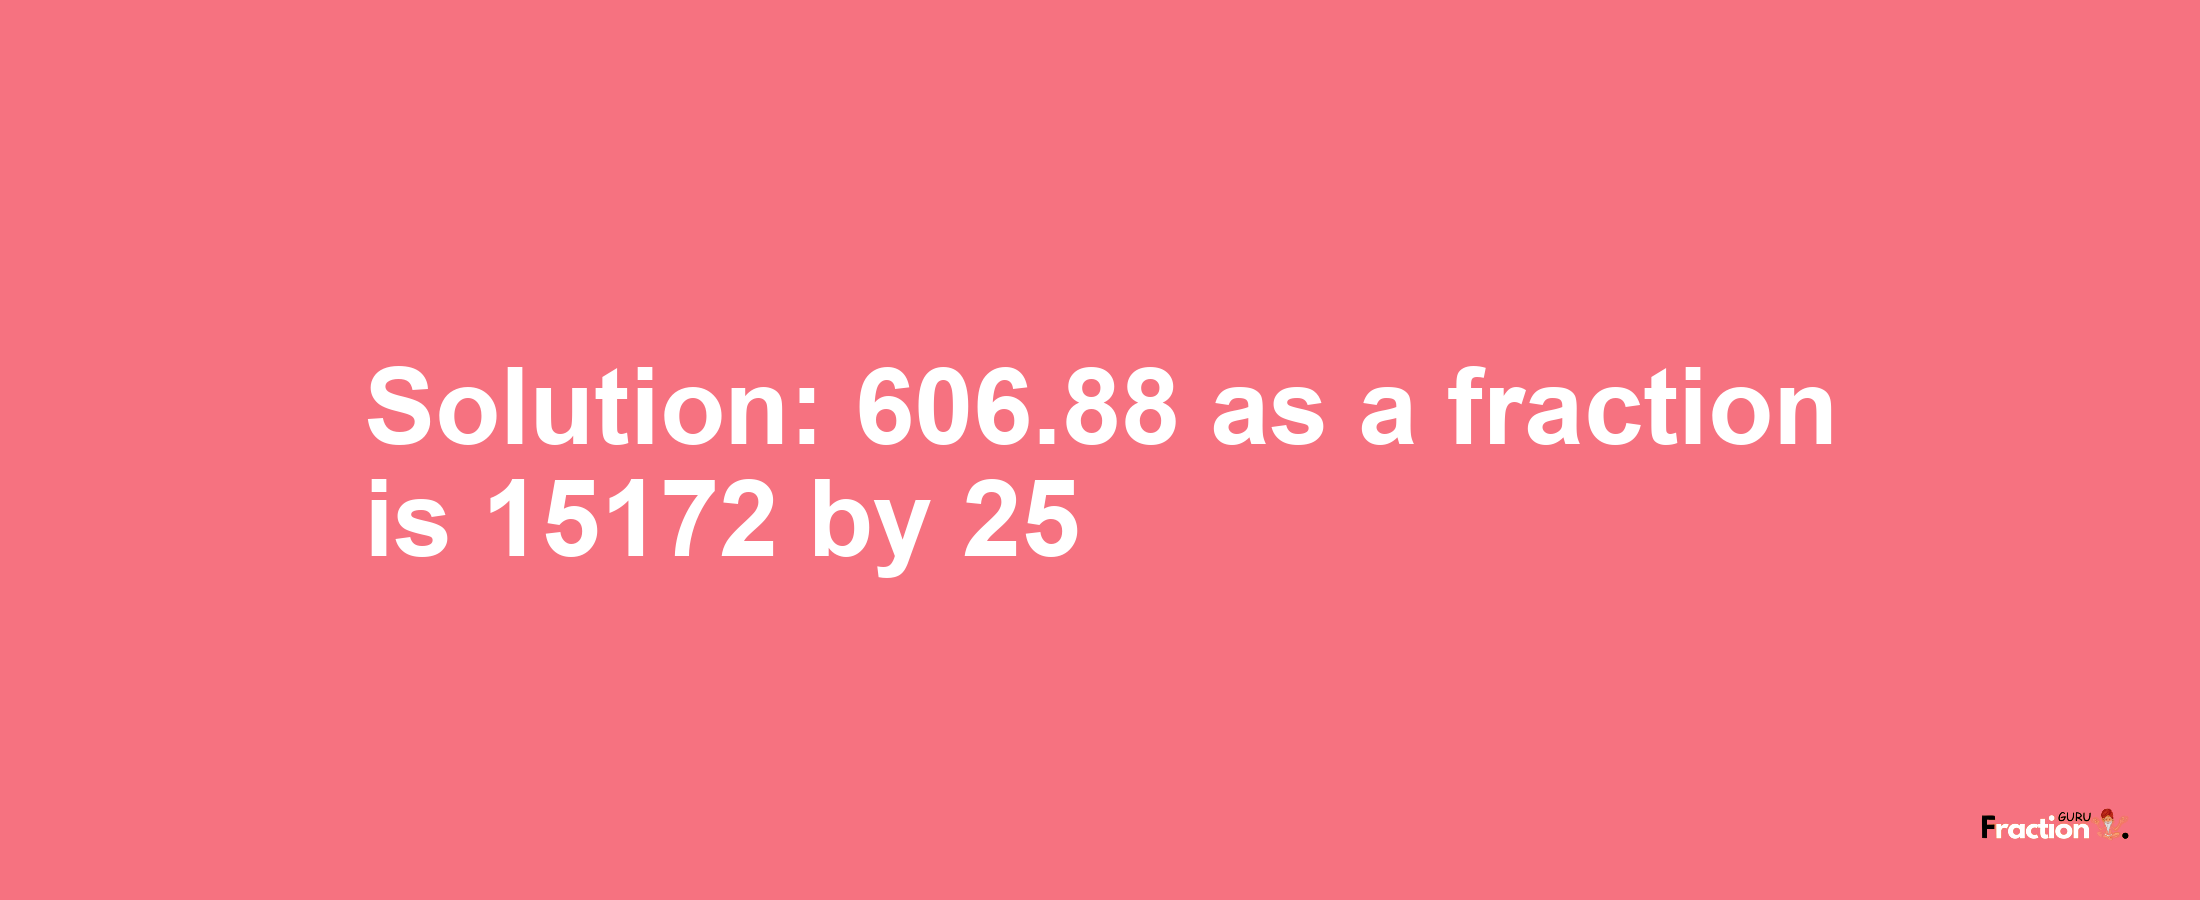 Solution:606.88 as a fraction is 15172/25